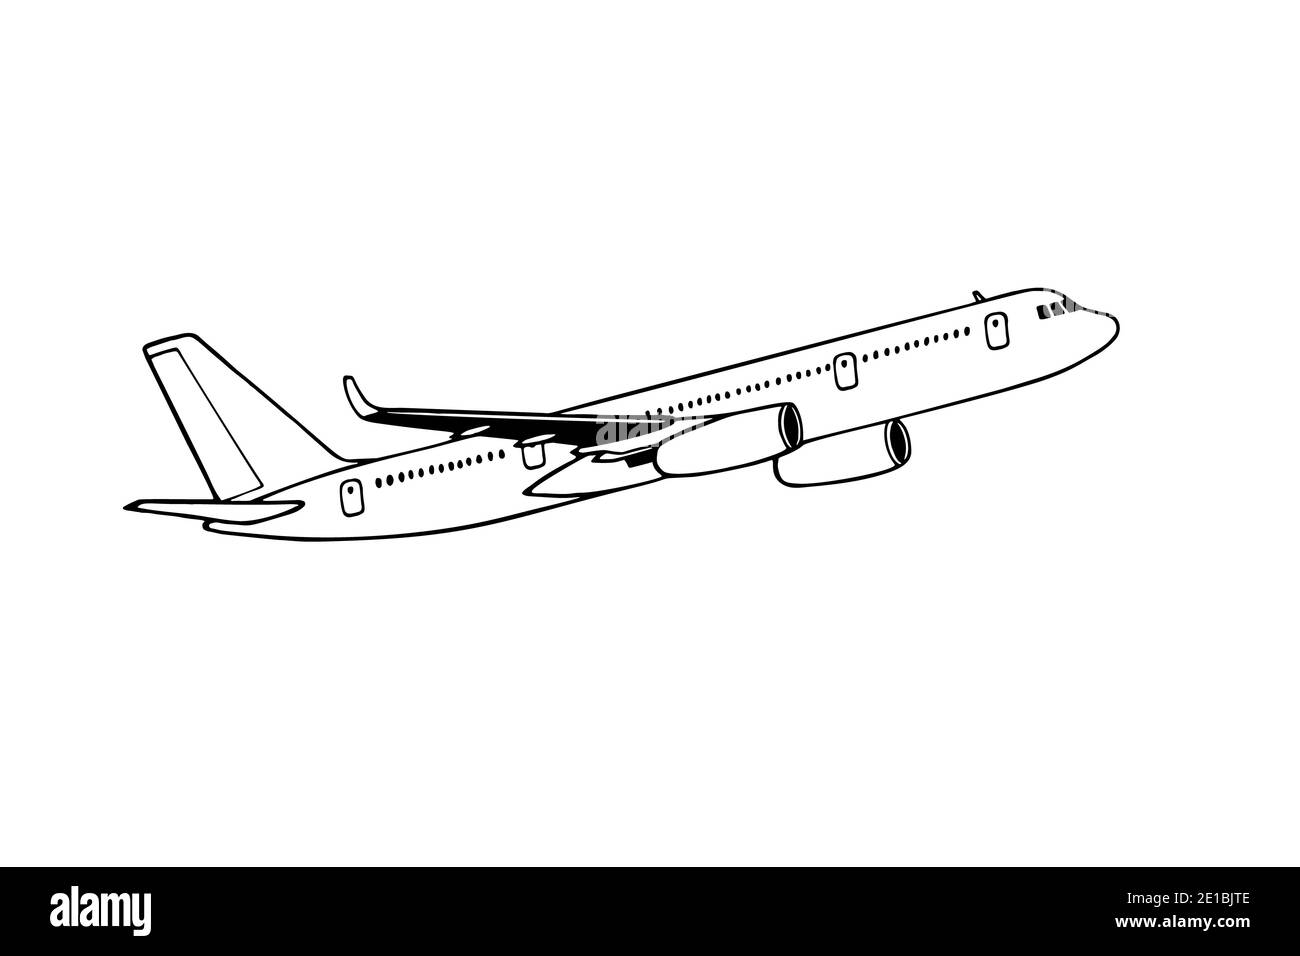 Jetliner hand drawn realistic doodle sketch tracing vector llustration.  Airline Concept Travel Passenger plane. Jet commercial airplane Stock Photo  - Alamy